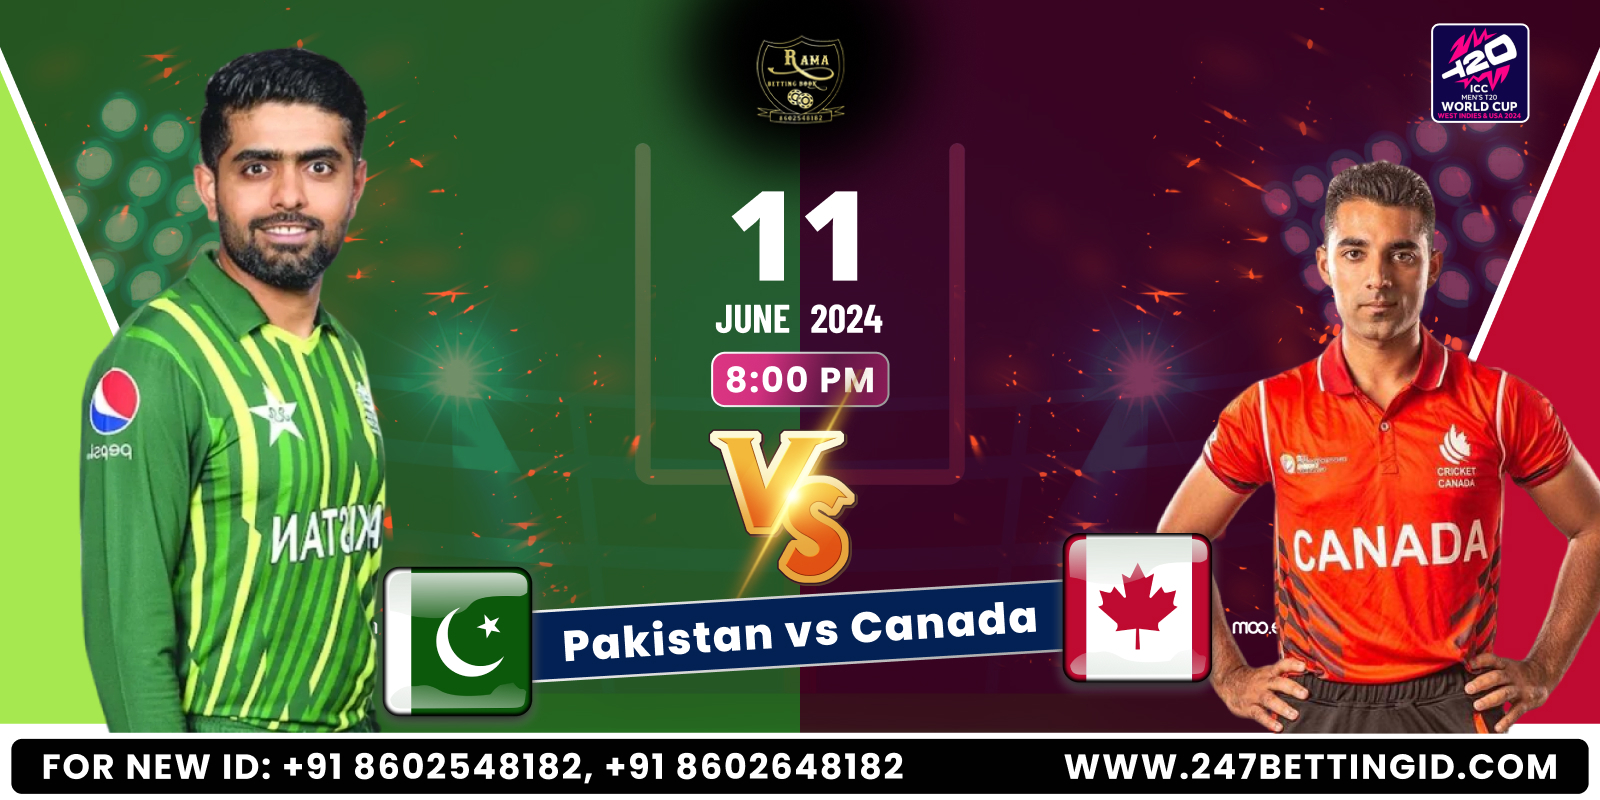 Today’s Match Prediction: Pakistan vs Canada in the T20 World Cup